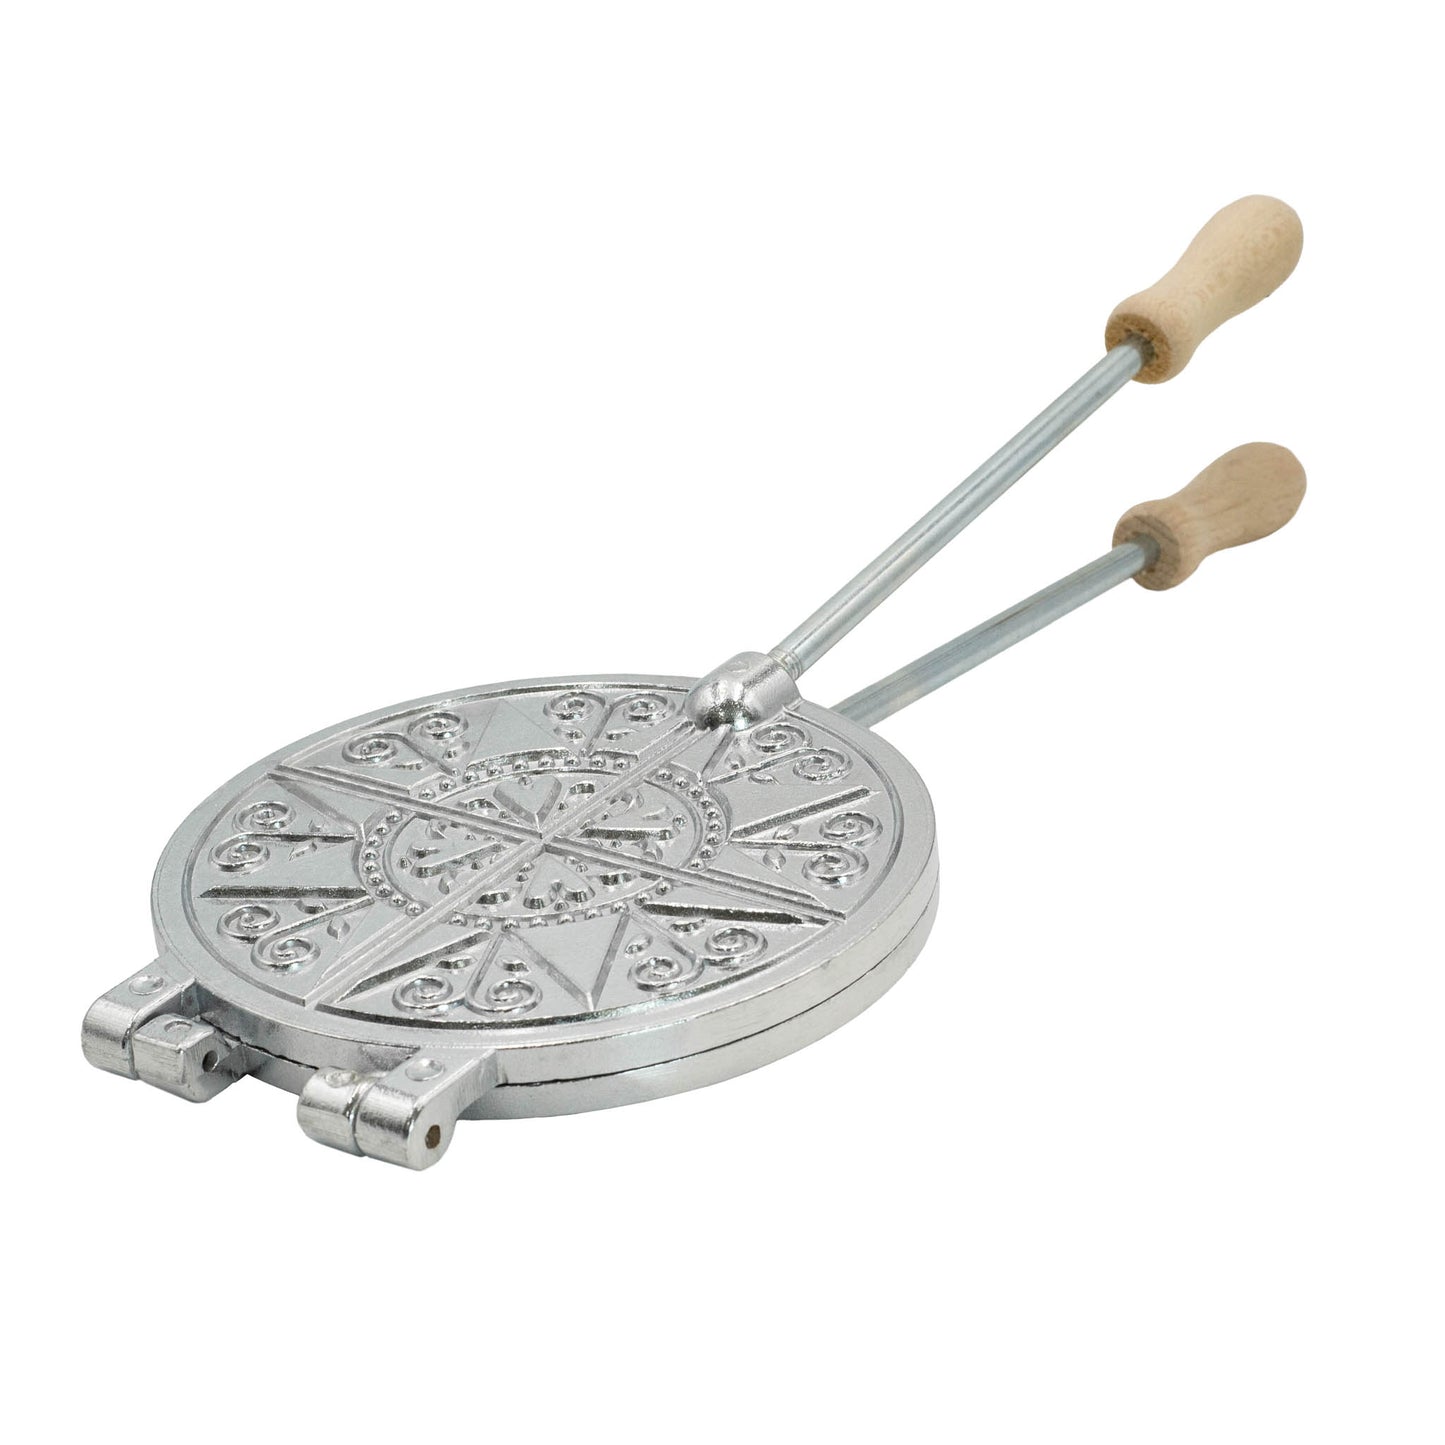 Round pizzelle mold with a 4 part Abruzzese pattern, for thin ferratelle on open flame, made with aluminium.